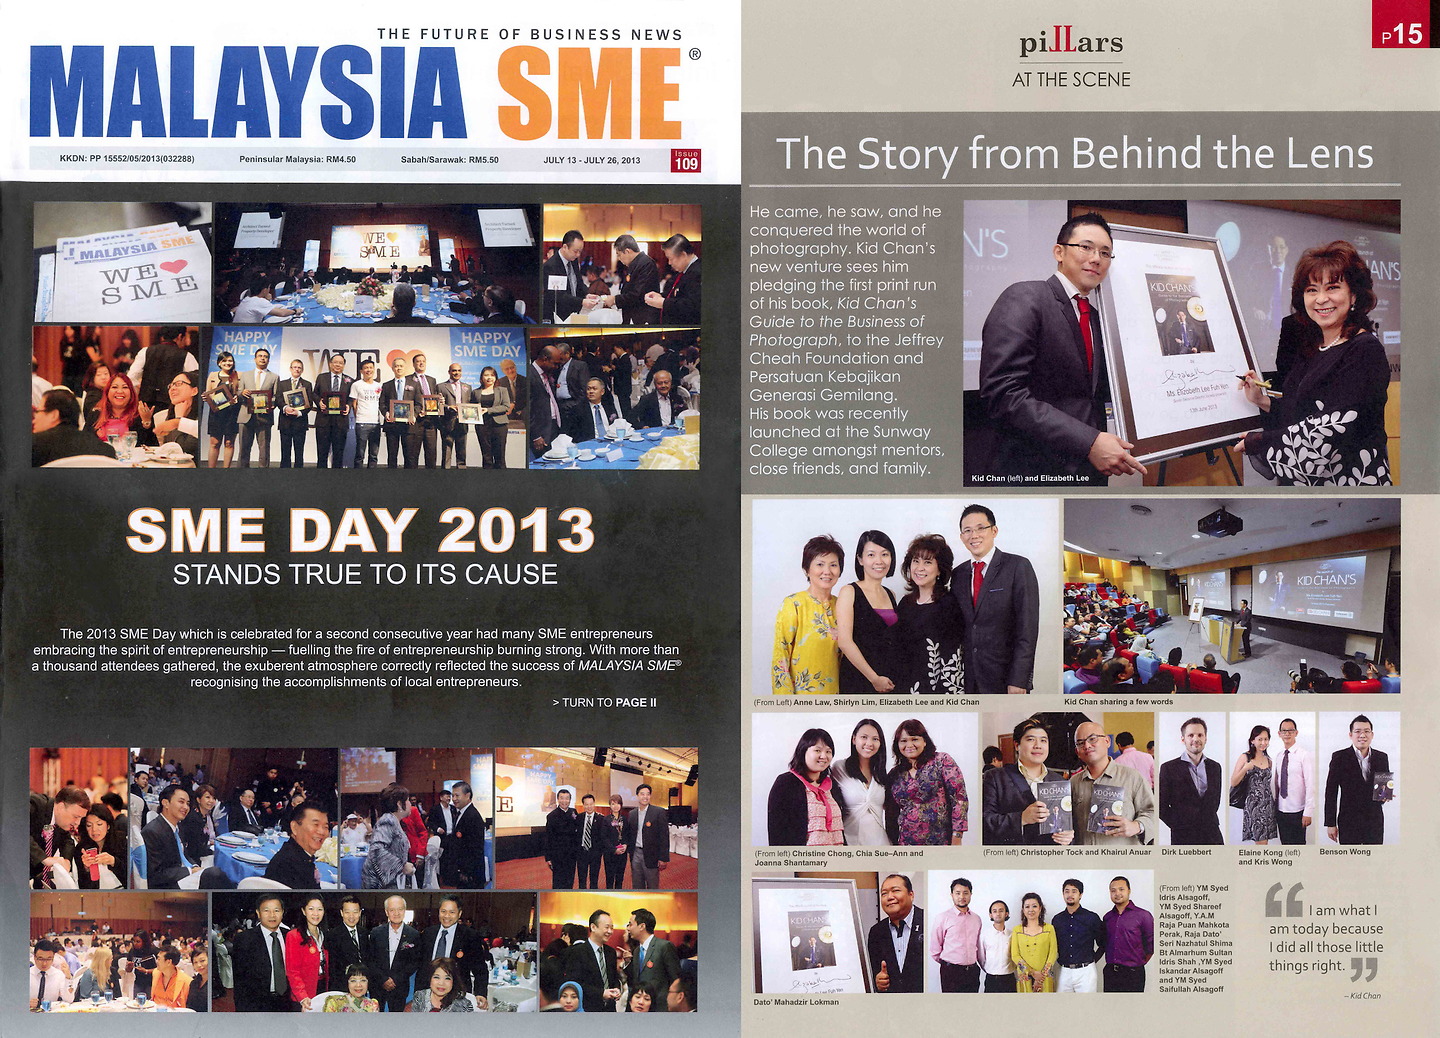 Malaysia SME, July 2013: Kid Chan, 'The Story from Behind the Lens'